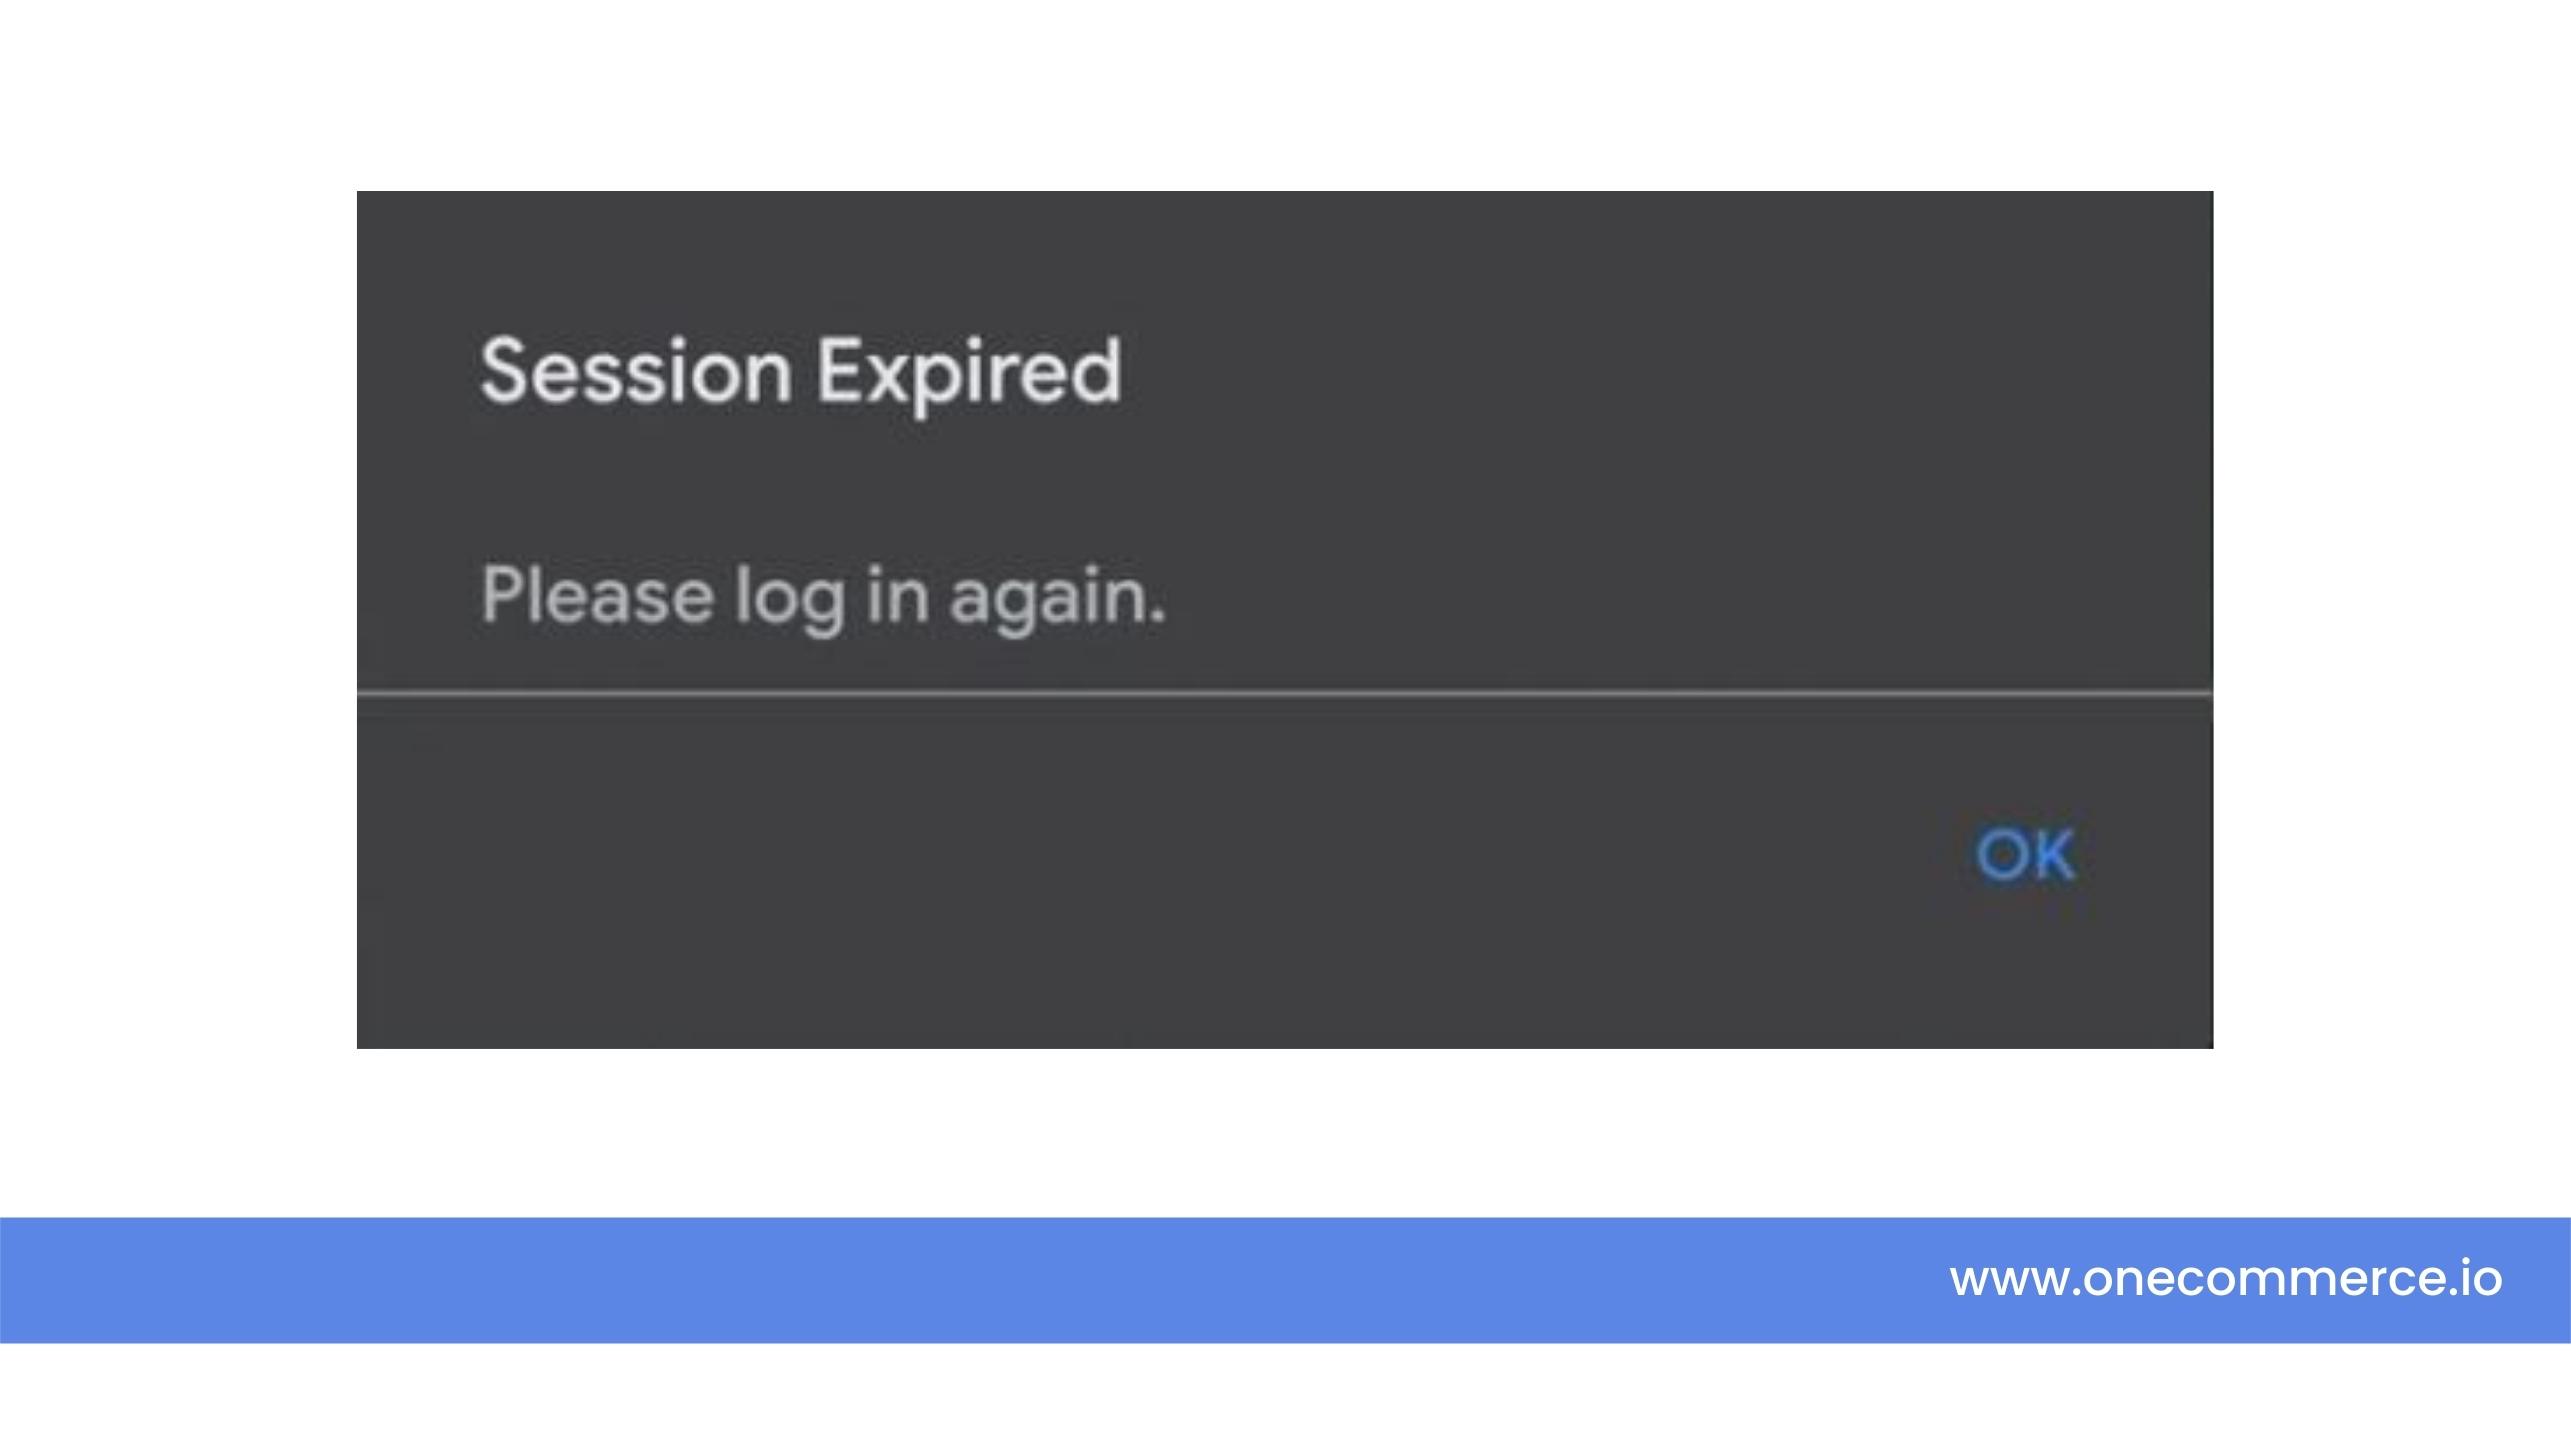 Facebook users logged out and users receive a message "Session has expired”